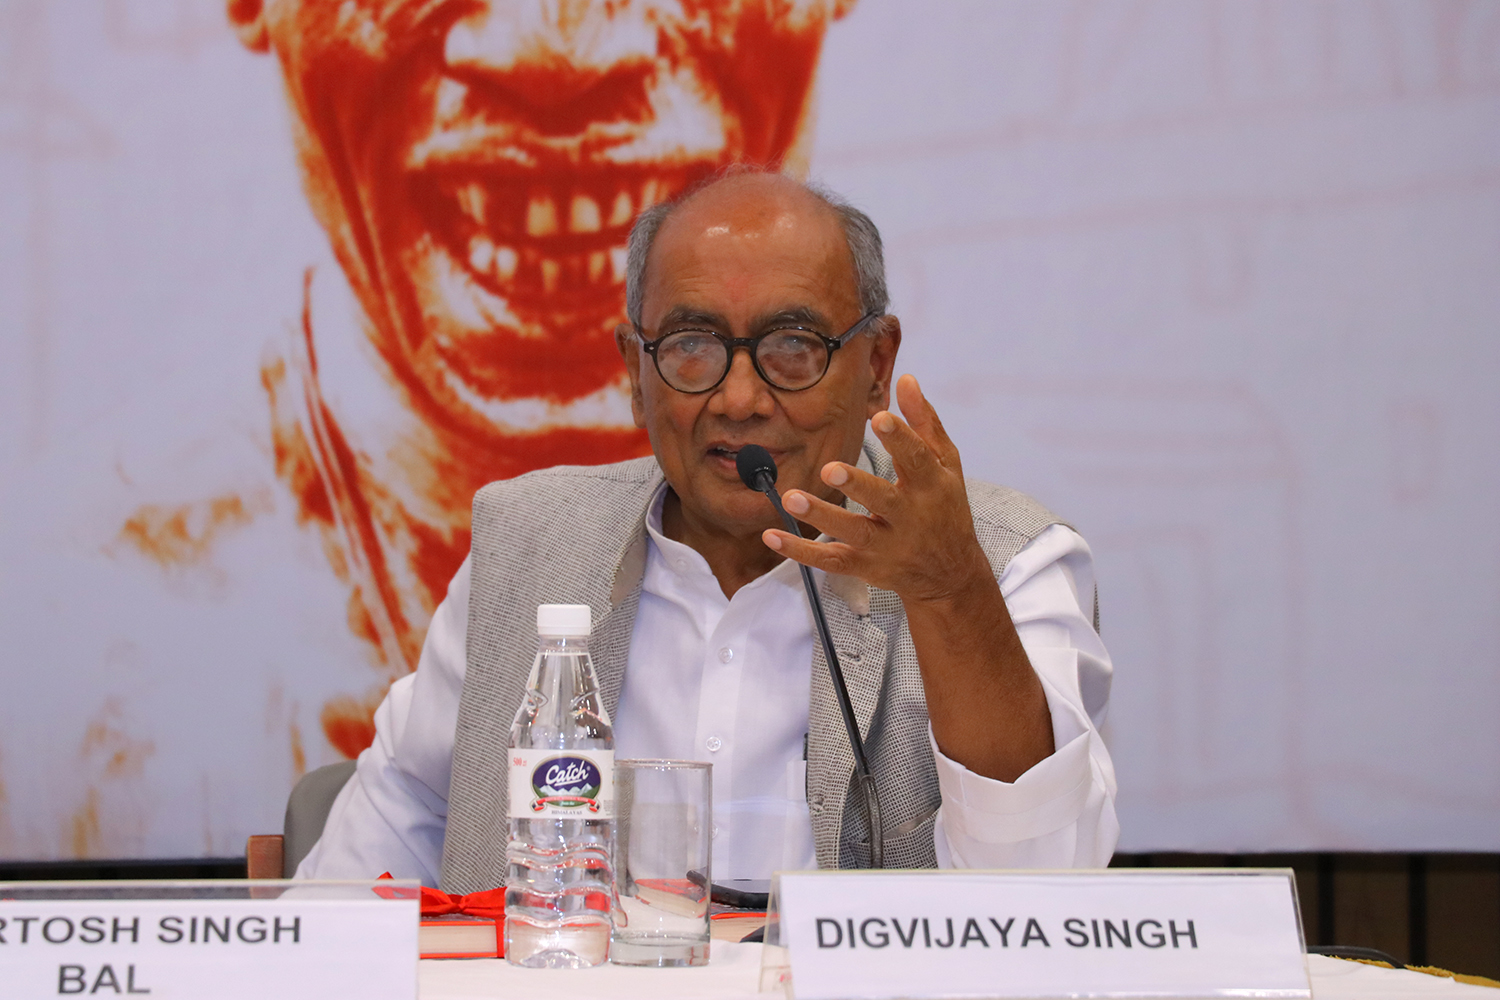 On Article 370, Congress should be marching from Lal Qila to Lal Chowk: Digvijaya Singh